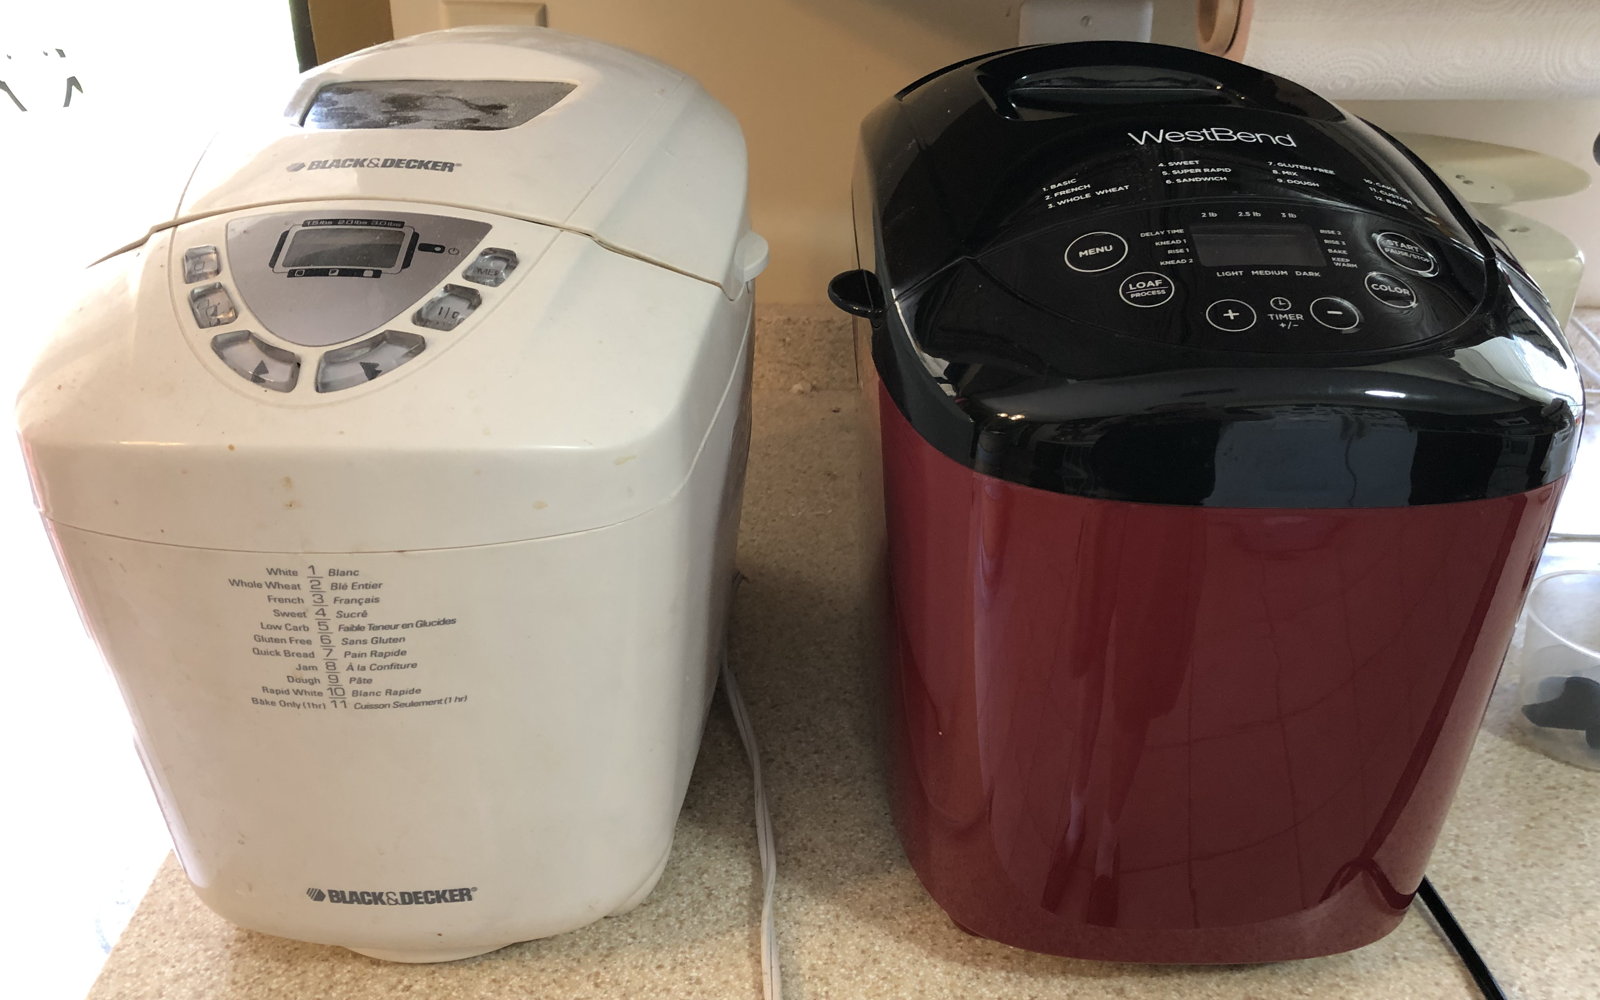 Black & Decker and West Bend breadmakers: The old Black & Decker B6000C and the new West Bend 47413 side-by-side.; bread machines; breadmakers